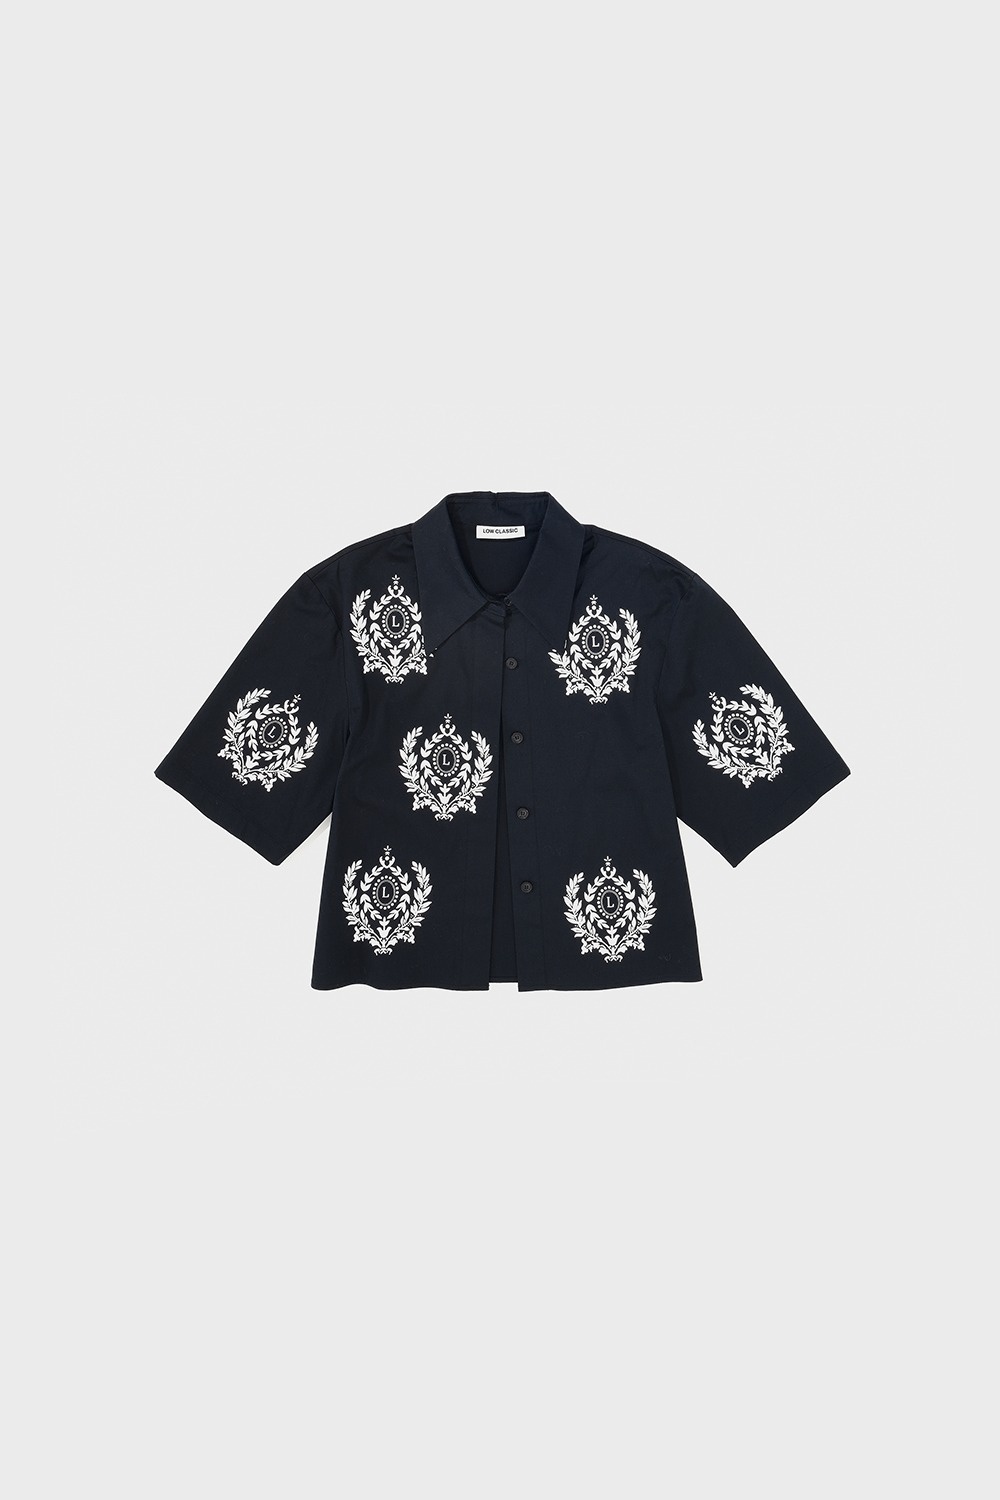 22FW LC ARCHIVE SHIRT - NAVY